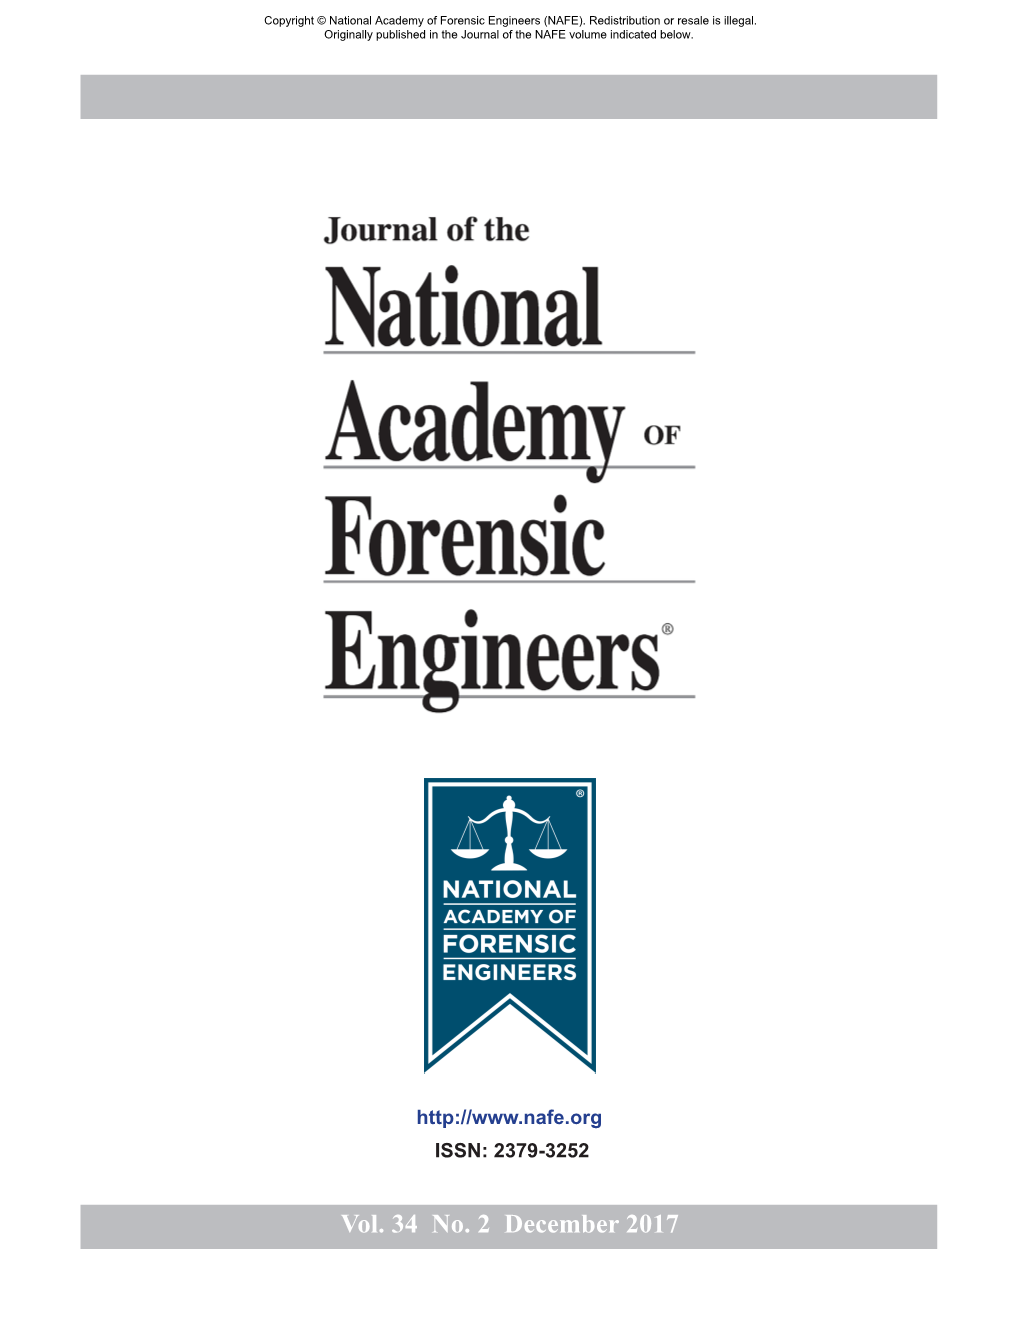 Vol. 34 No. 2 December 2017 Copyright © National Academy of Forensic Engineers (NAFE)